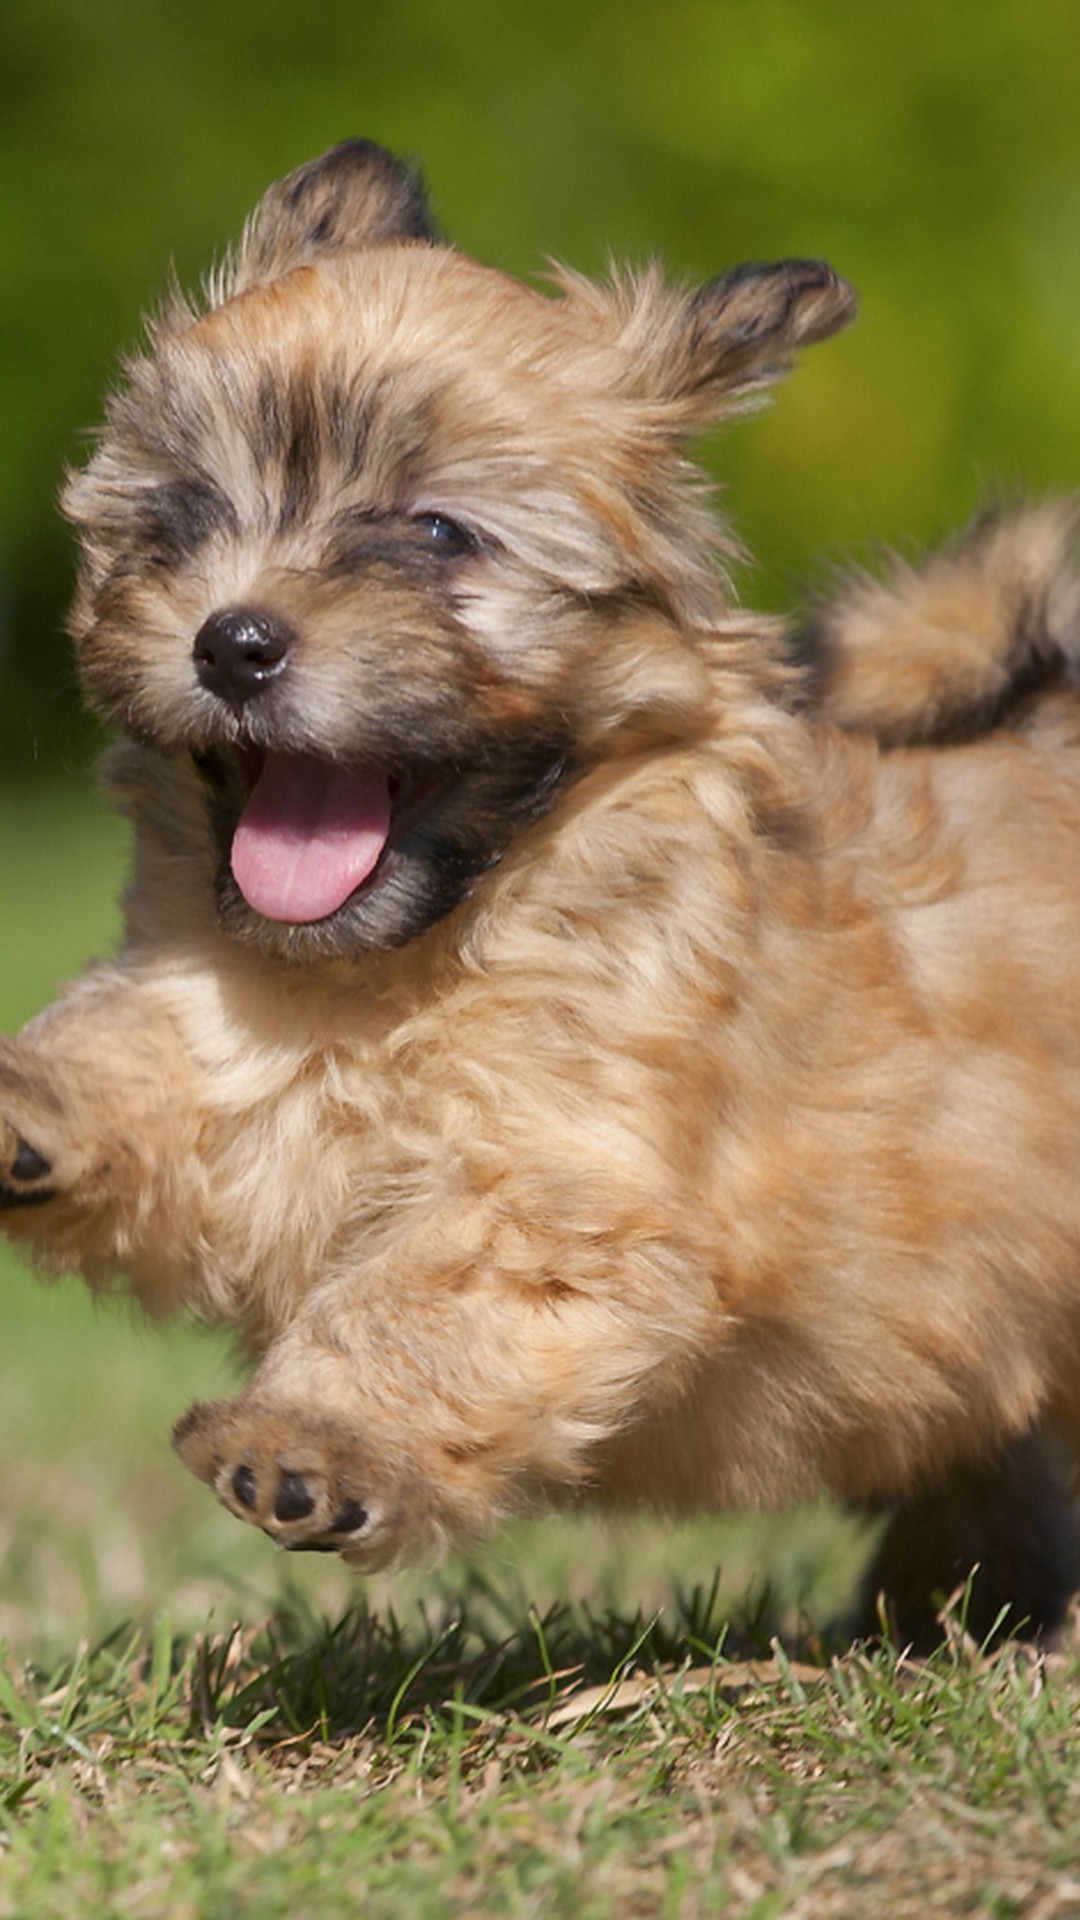 Cute Puppies Backgrounds For Android with HD resolution 1080x1920